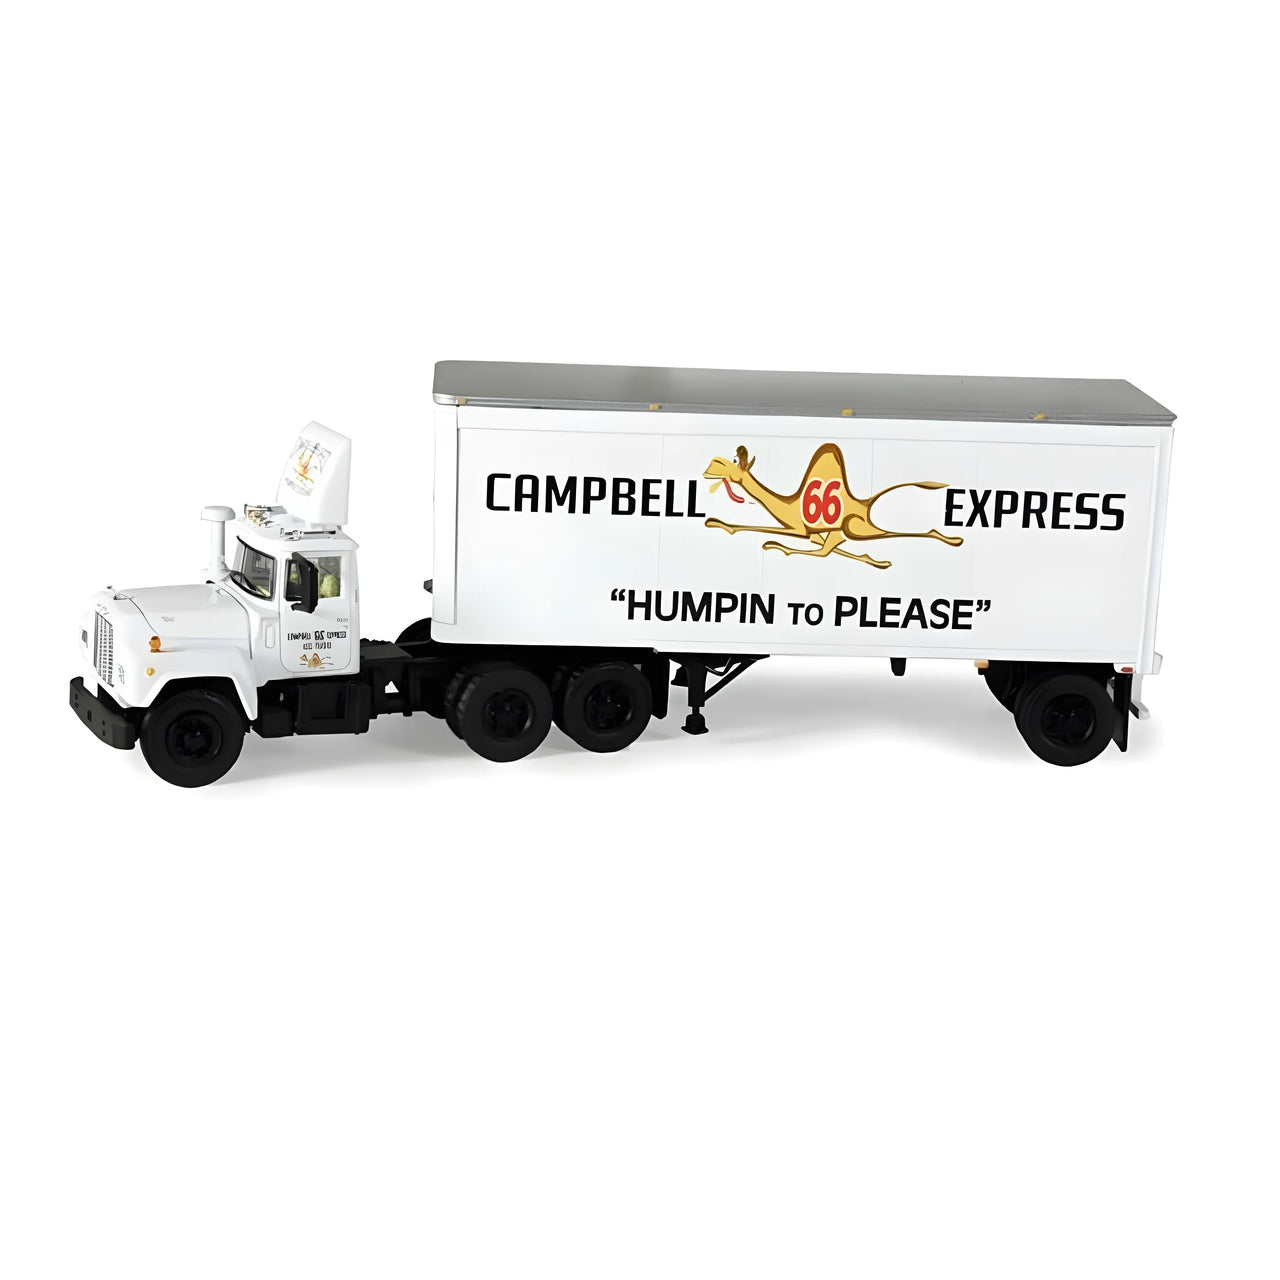 60-0254 Mack R-Model Day Cab 28' Trailer Campbell 66 Express 1:64 Scale (Discontinued Model)